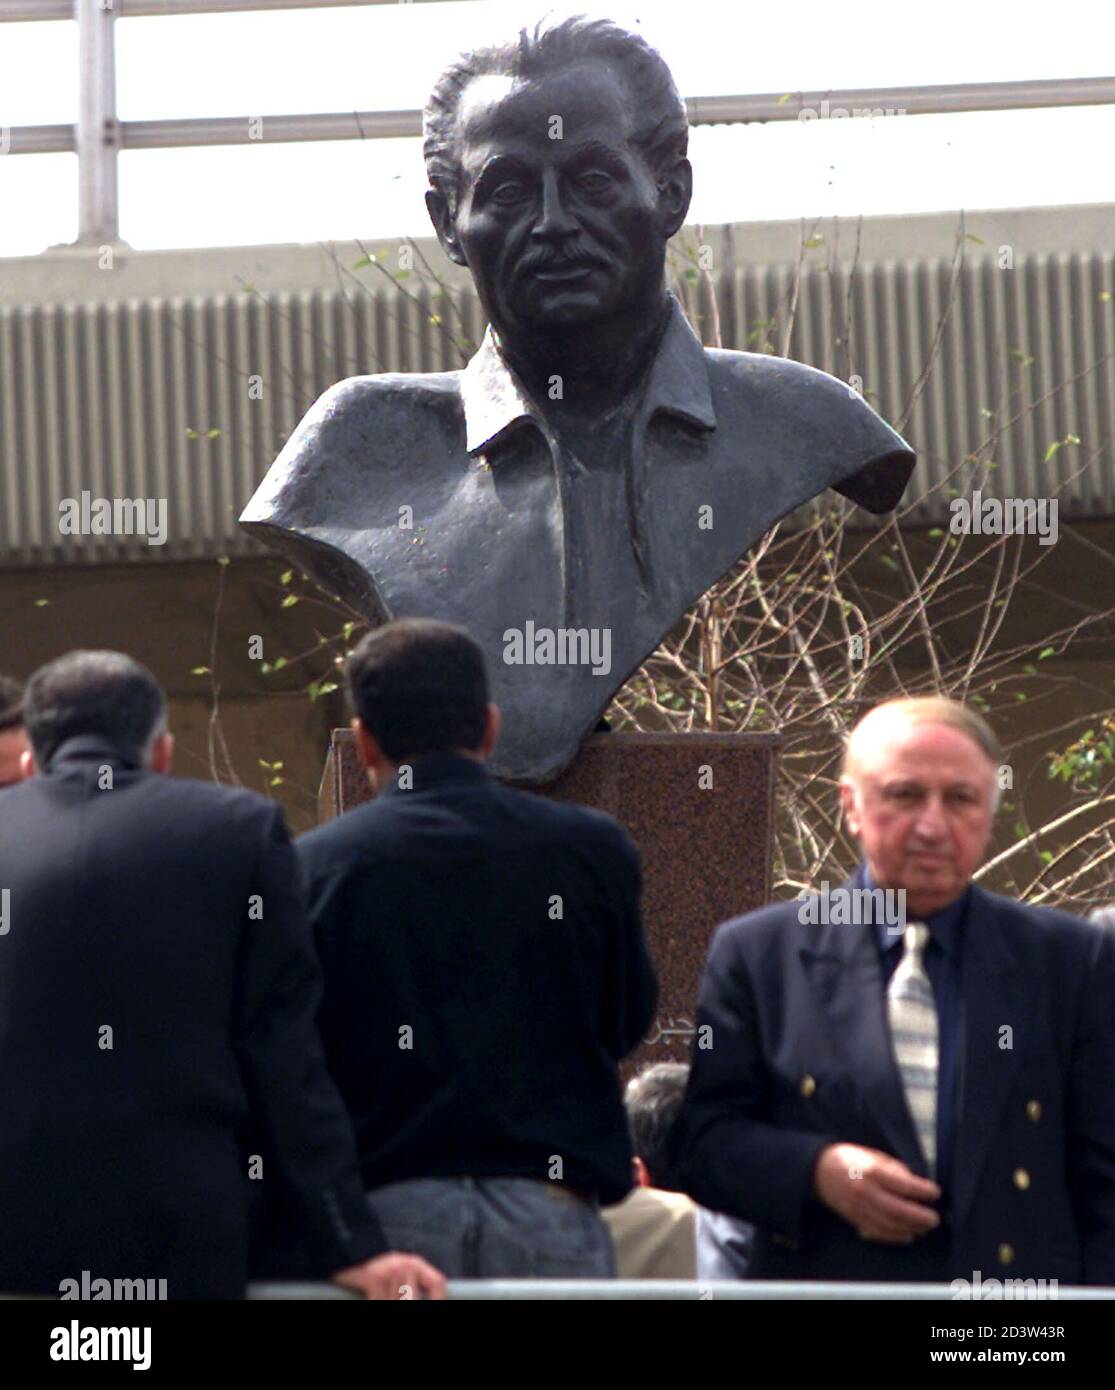 Lebanese residents watch the statue of the well known writer and philosopher Gibran Khalil Gibran, during of the opening ceremony in a garden named after him in downtown Beirut March 30,2001. The statue was made by Lebanese sculpture Zaven Hadichian.  JS/CLH/ Stock Photo